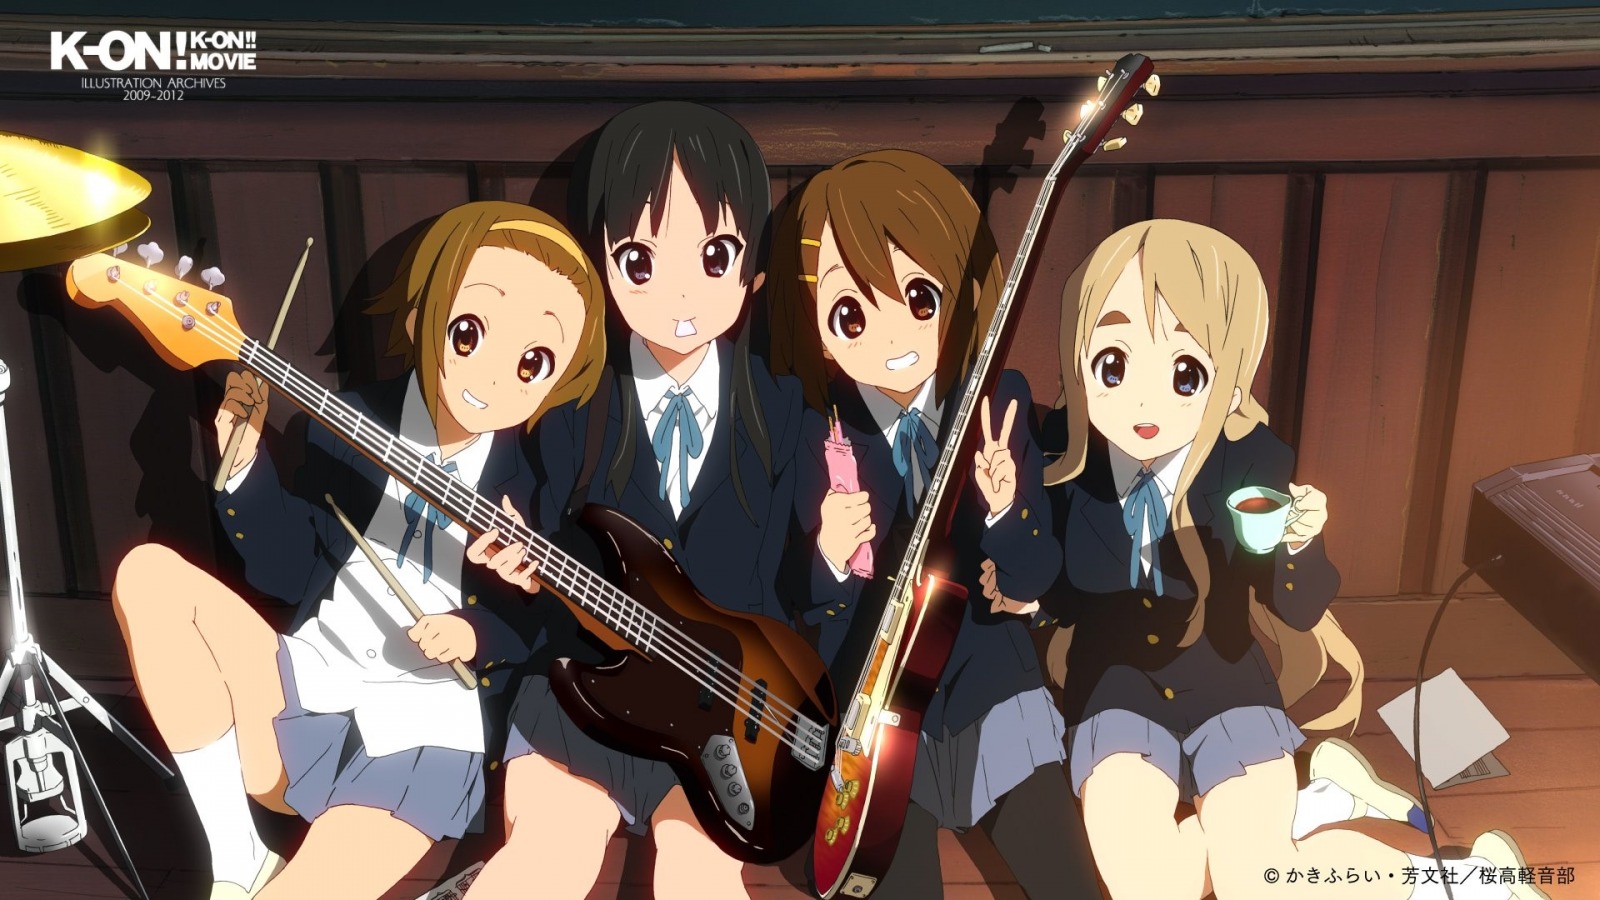 K-ON! IILUSTRATION ARCHIEVES 2009-2012 P.1 [P3]